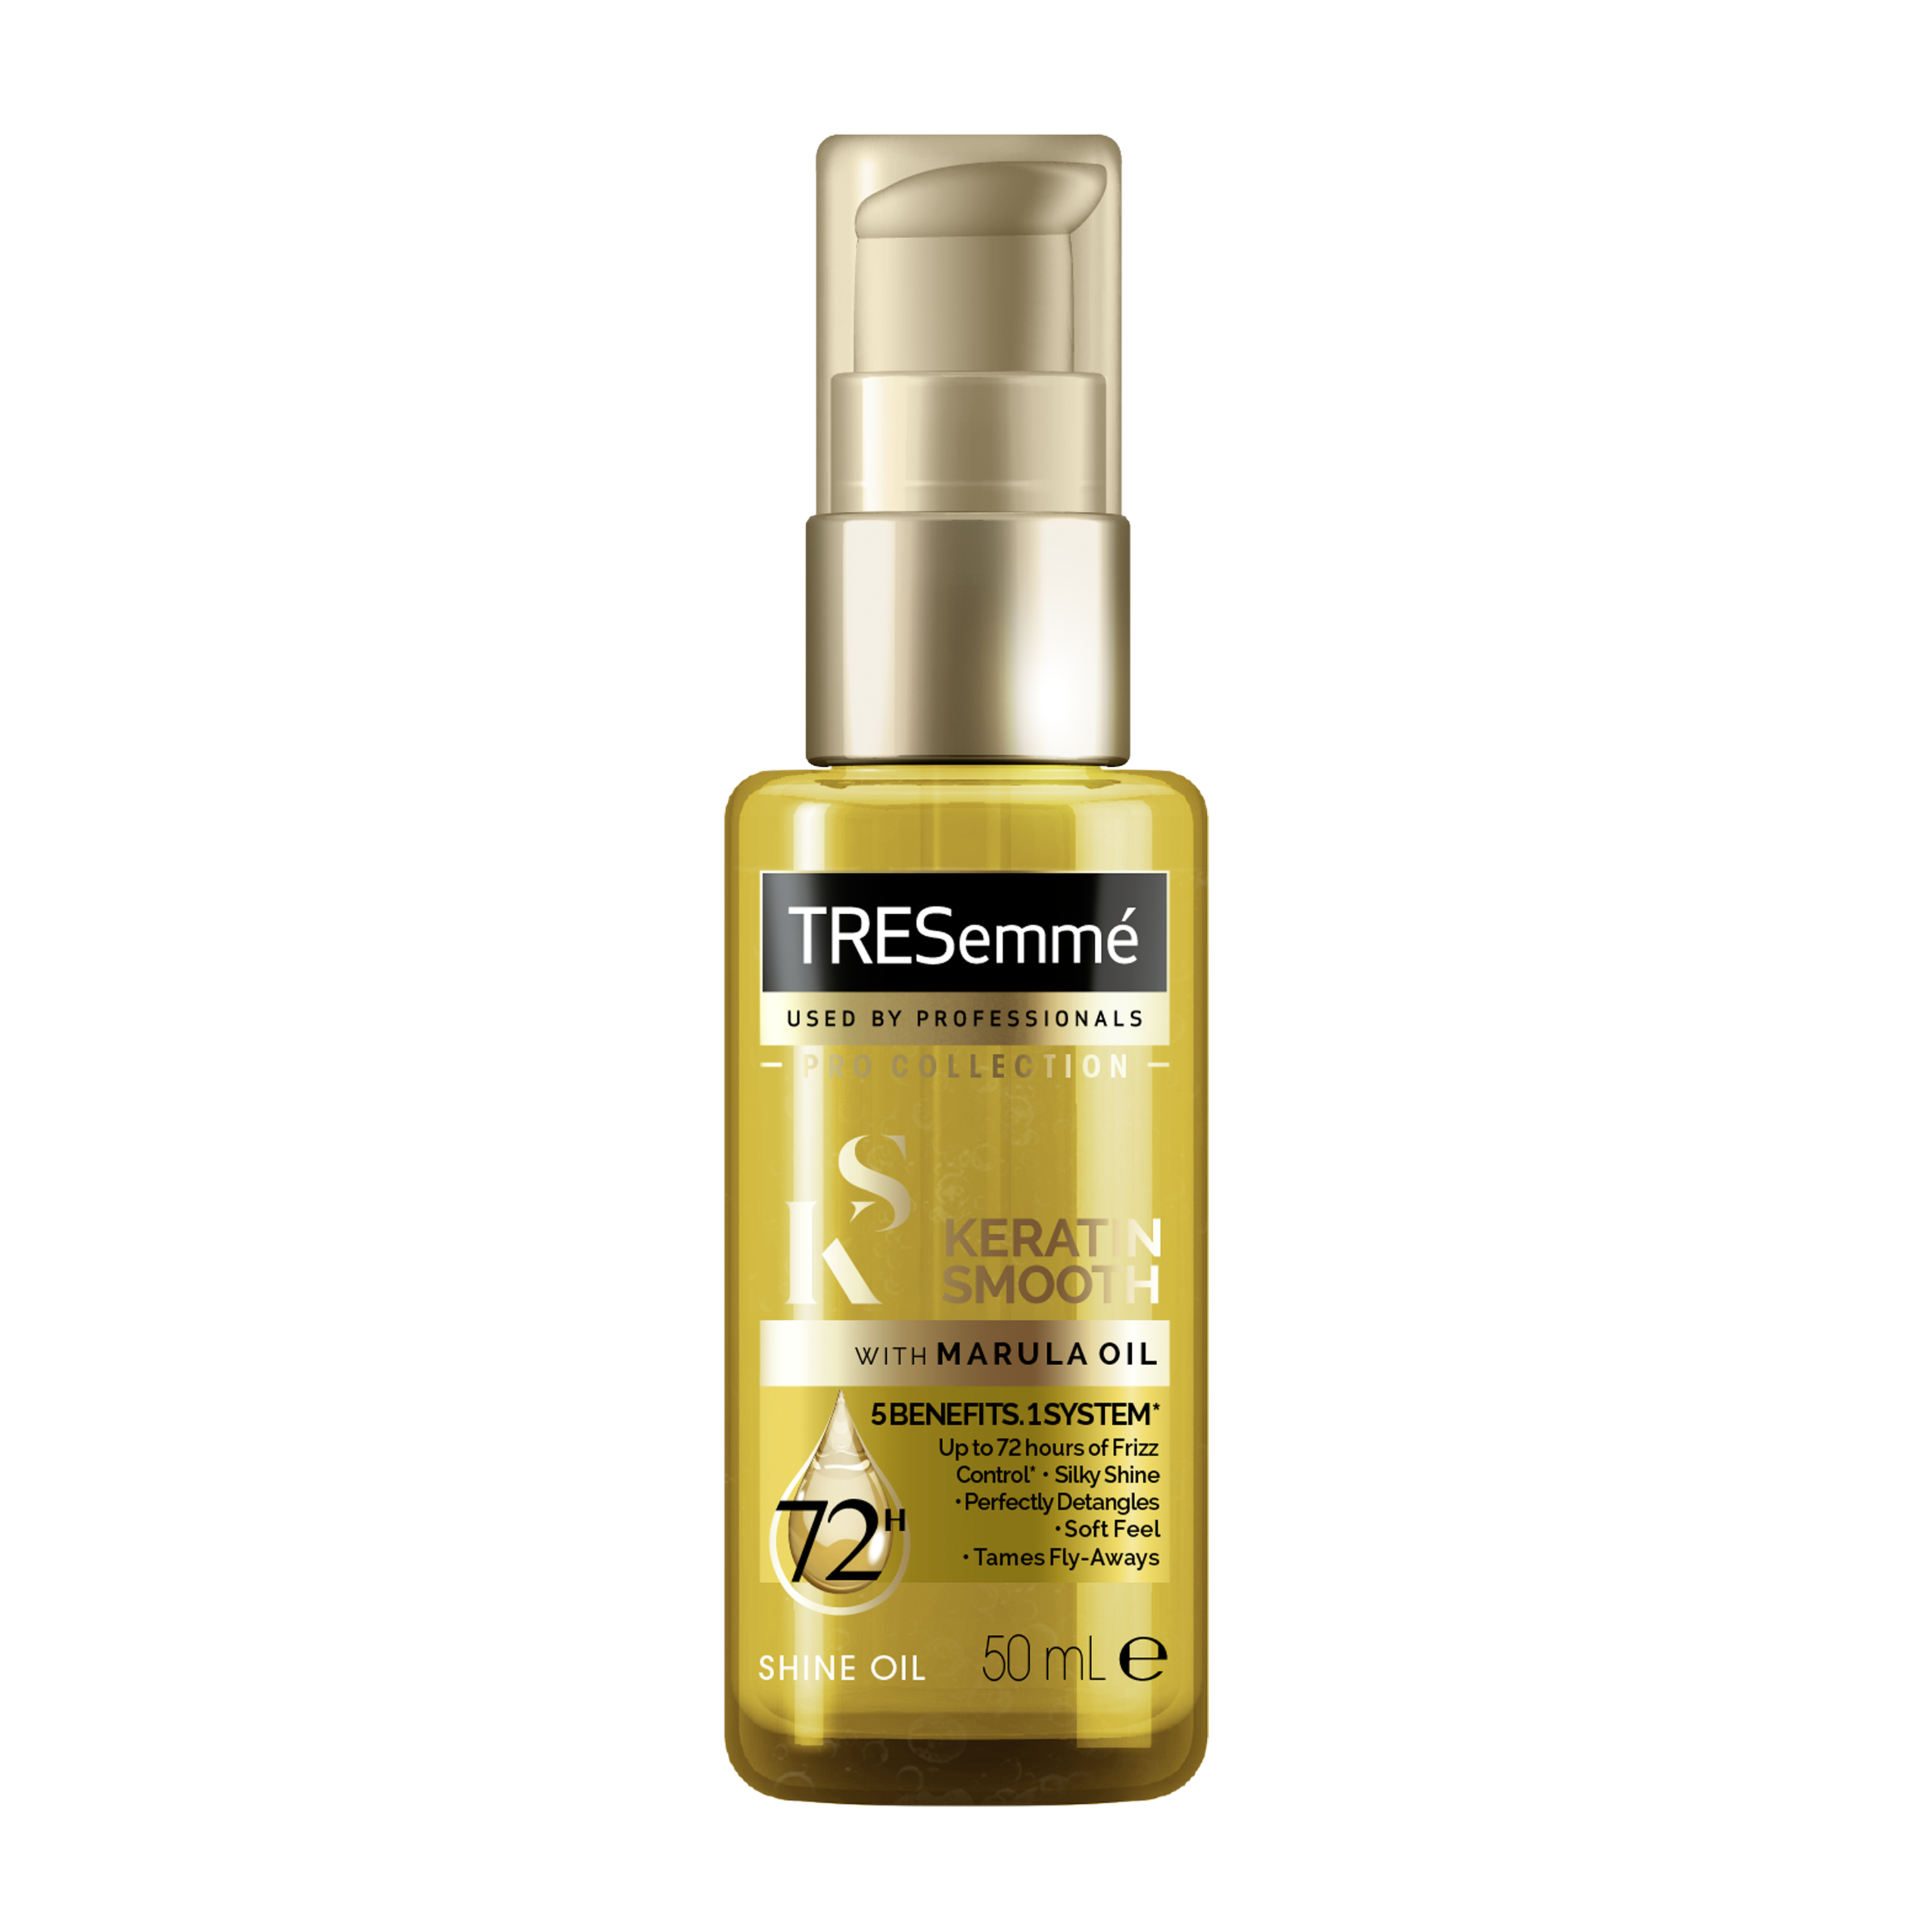 A 50ml bottle of TRESemmé Keratin Smooth Oil front of pack image